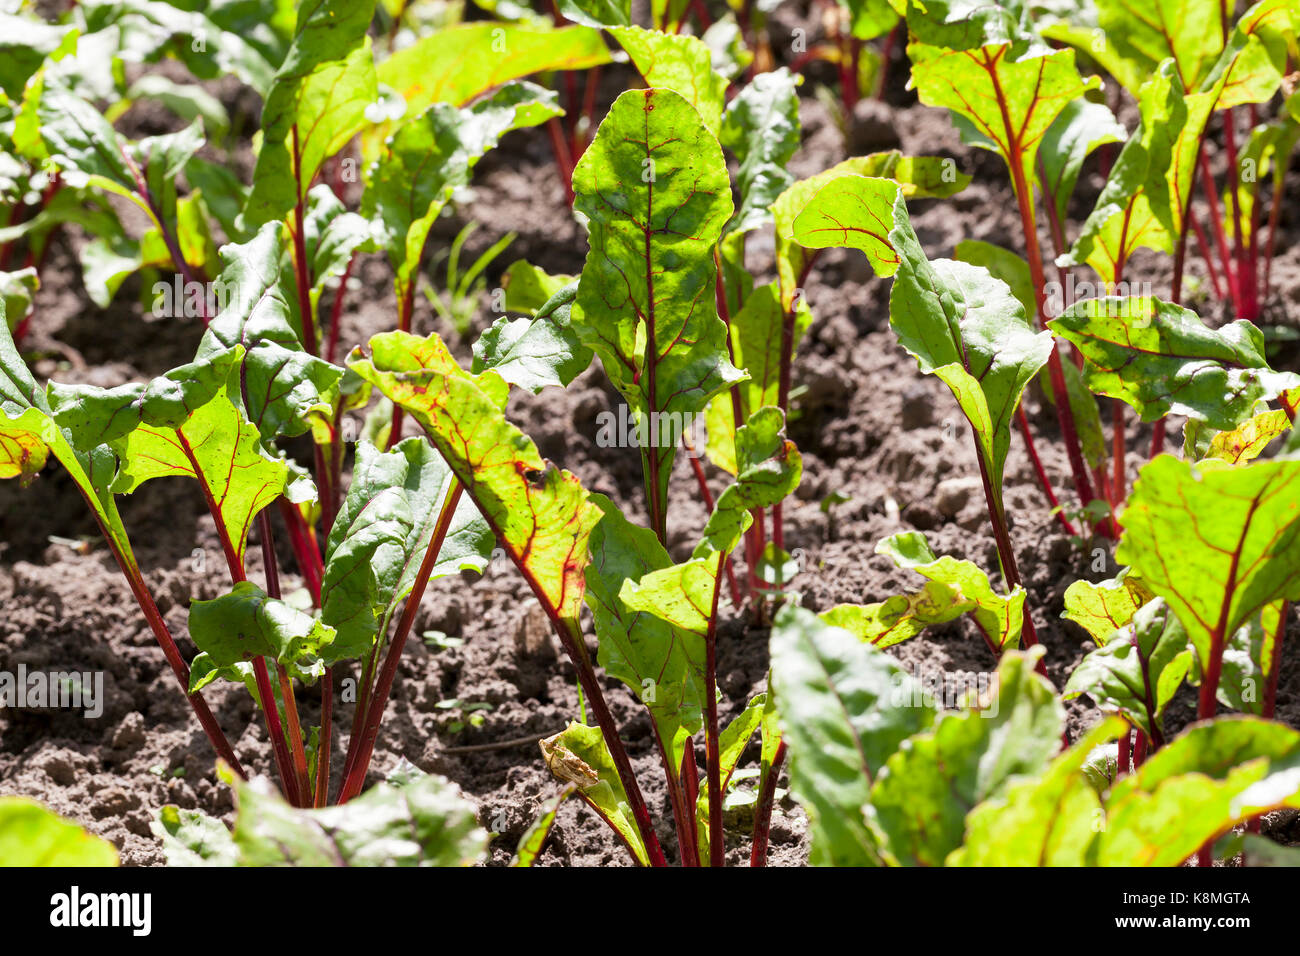 A beet of red beet growing on an agricultural field in the spring. Photo close-up of a field with several beetles Stock Photo